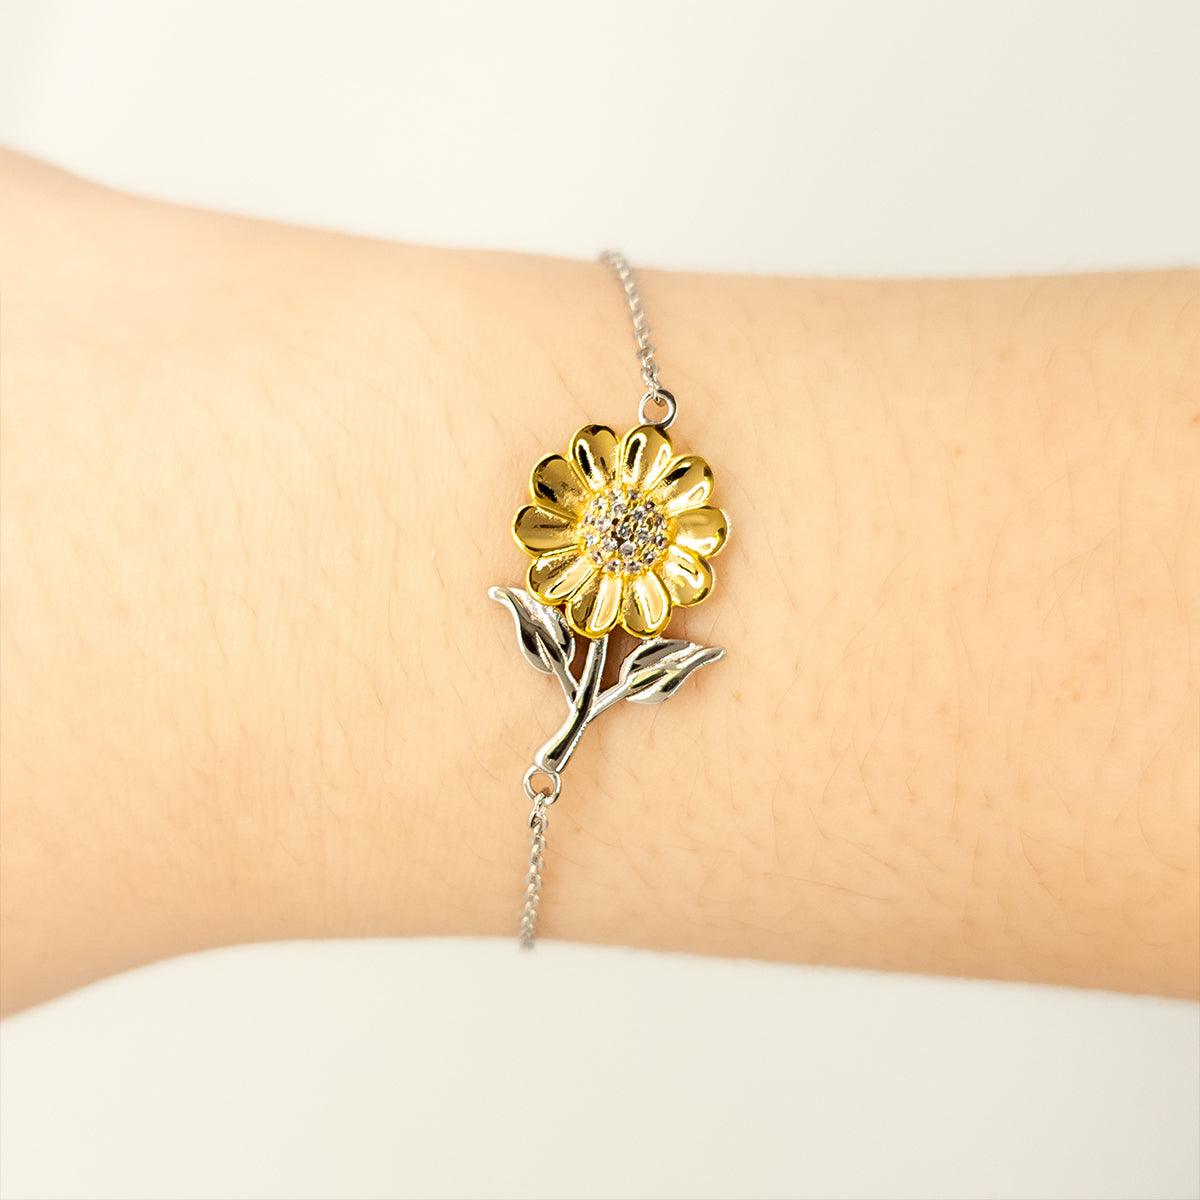 Mental Health Counselor Sunflower Bracelet - Thanks for being who you are - Birthday Christmas Jewelry Gifts Coworkers Colleague Boss - Mallard Moon Gift Shop